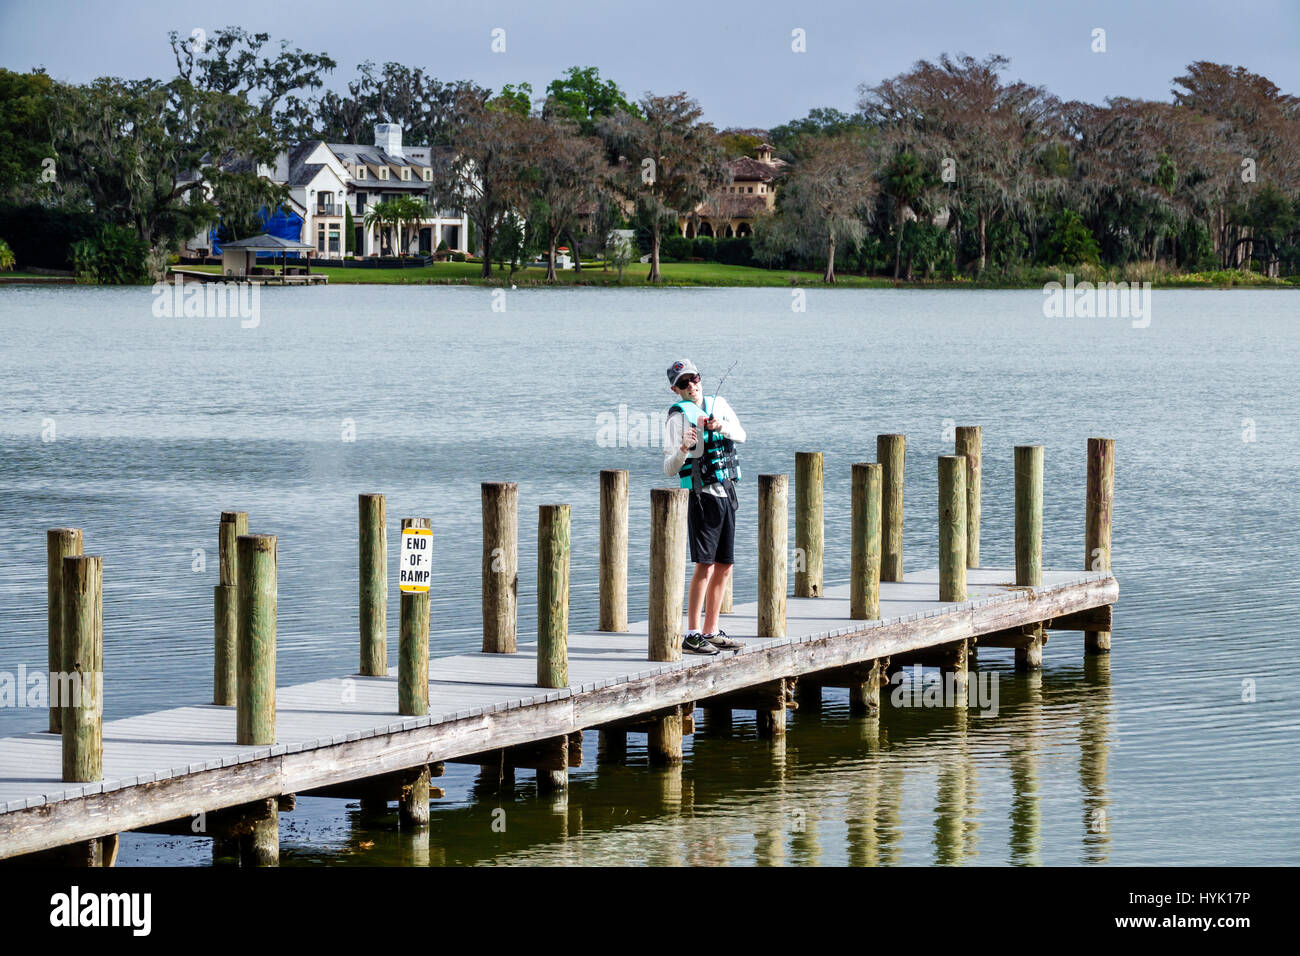 Winter Park Florida,Orlando,Lake Virginia,Dinky Dock Park,dock,boy boys,male kid kids child children youngster youngsters youth youths fishing,scenic, Stock Photo